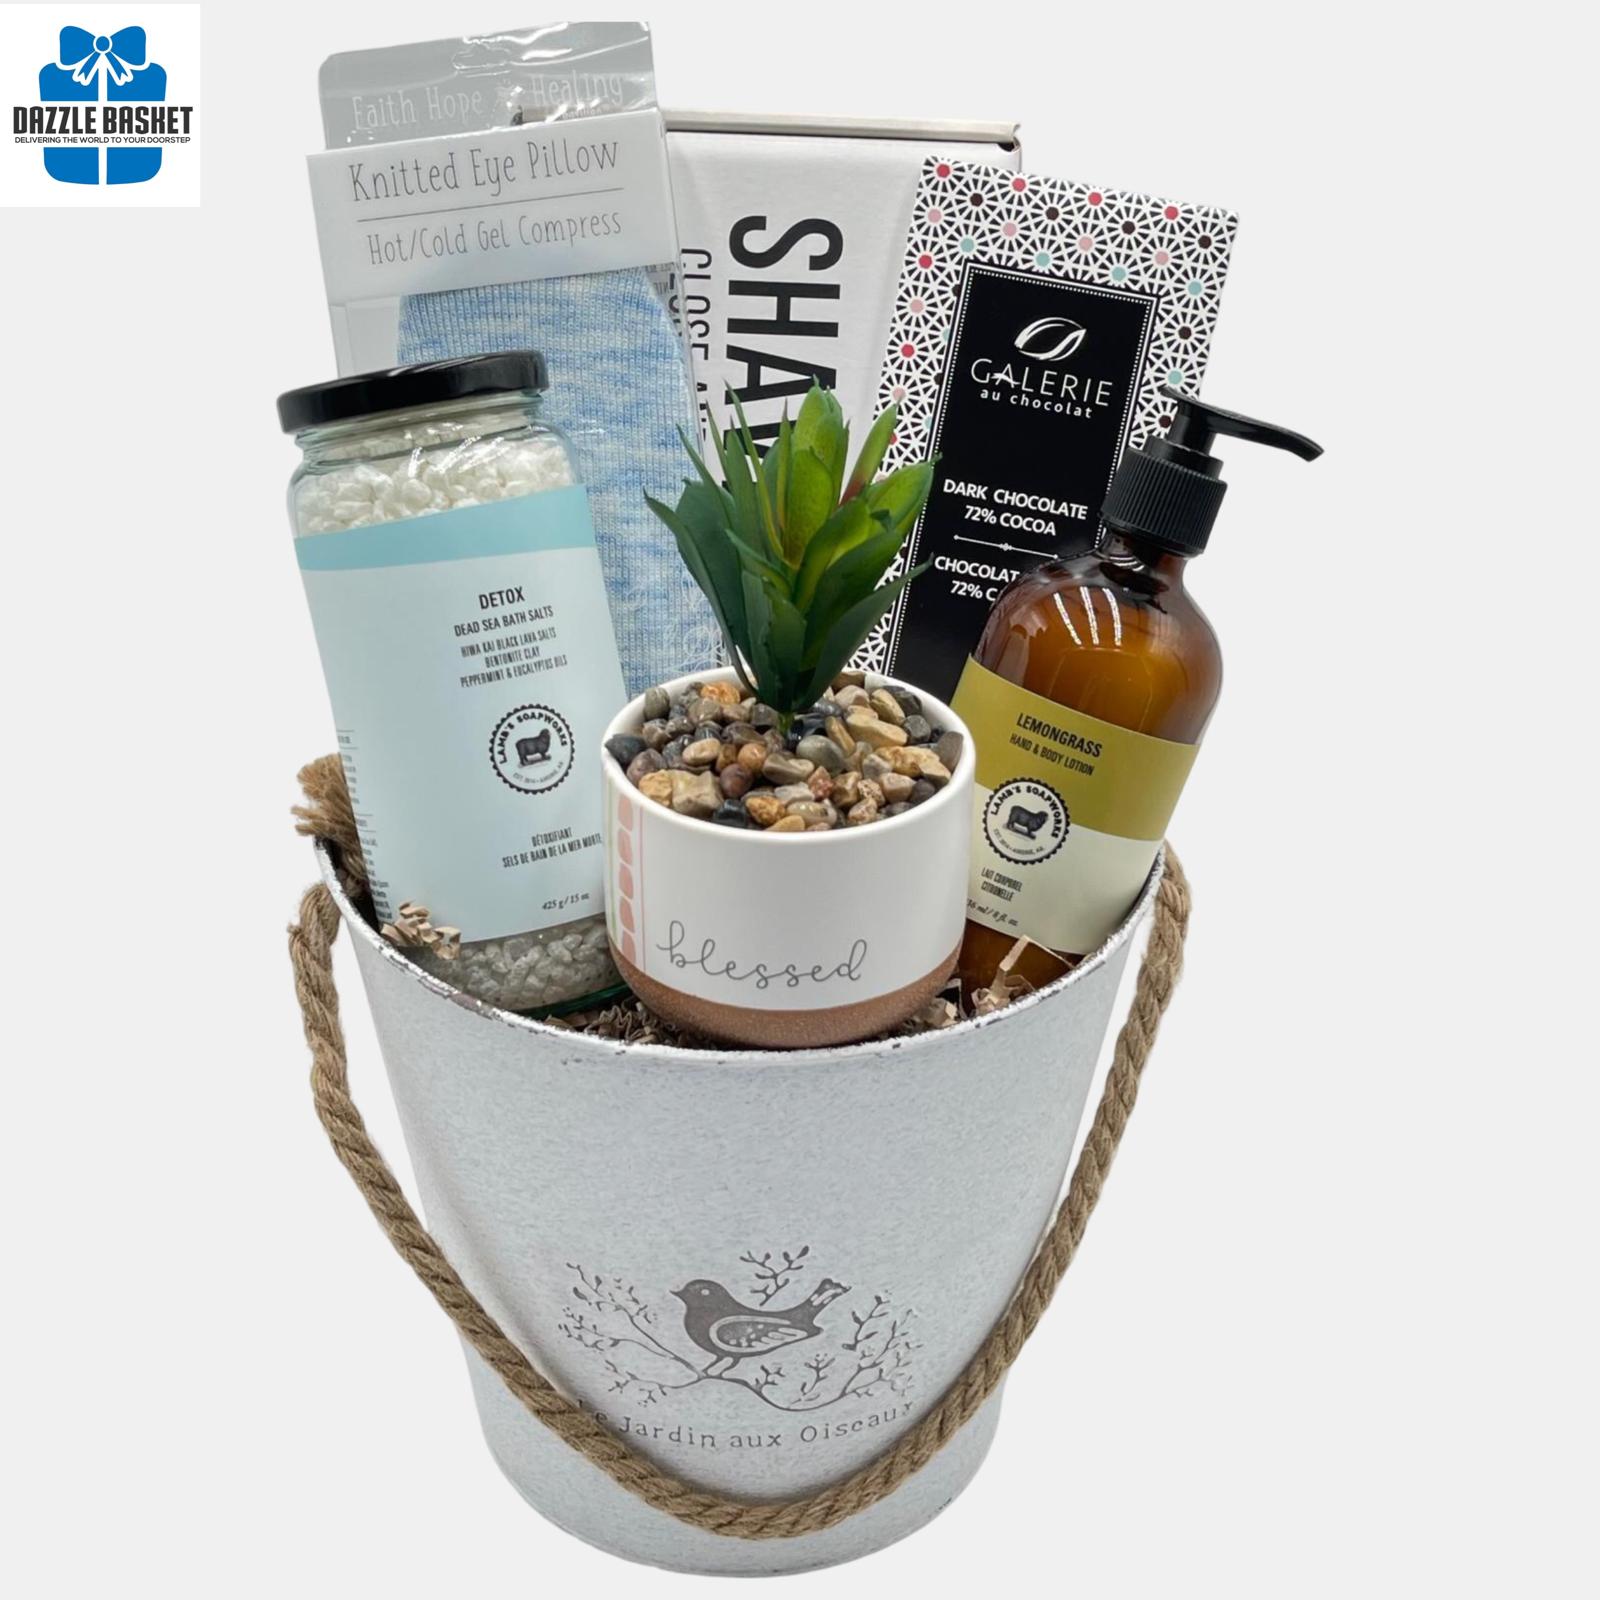 A Calgary spa gift basket with top of the line spa products & chocolate arranged in a white round metal basket.